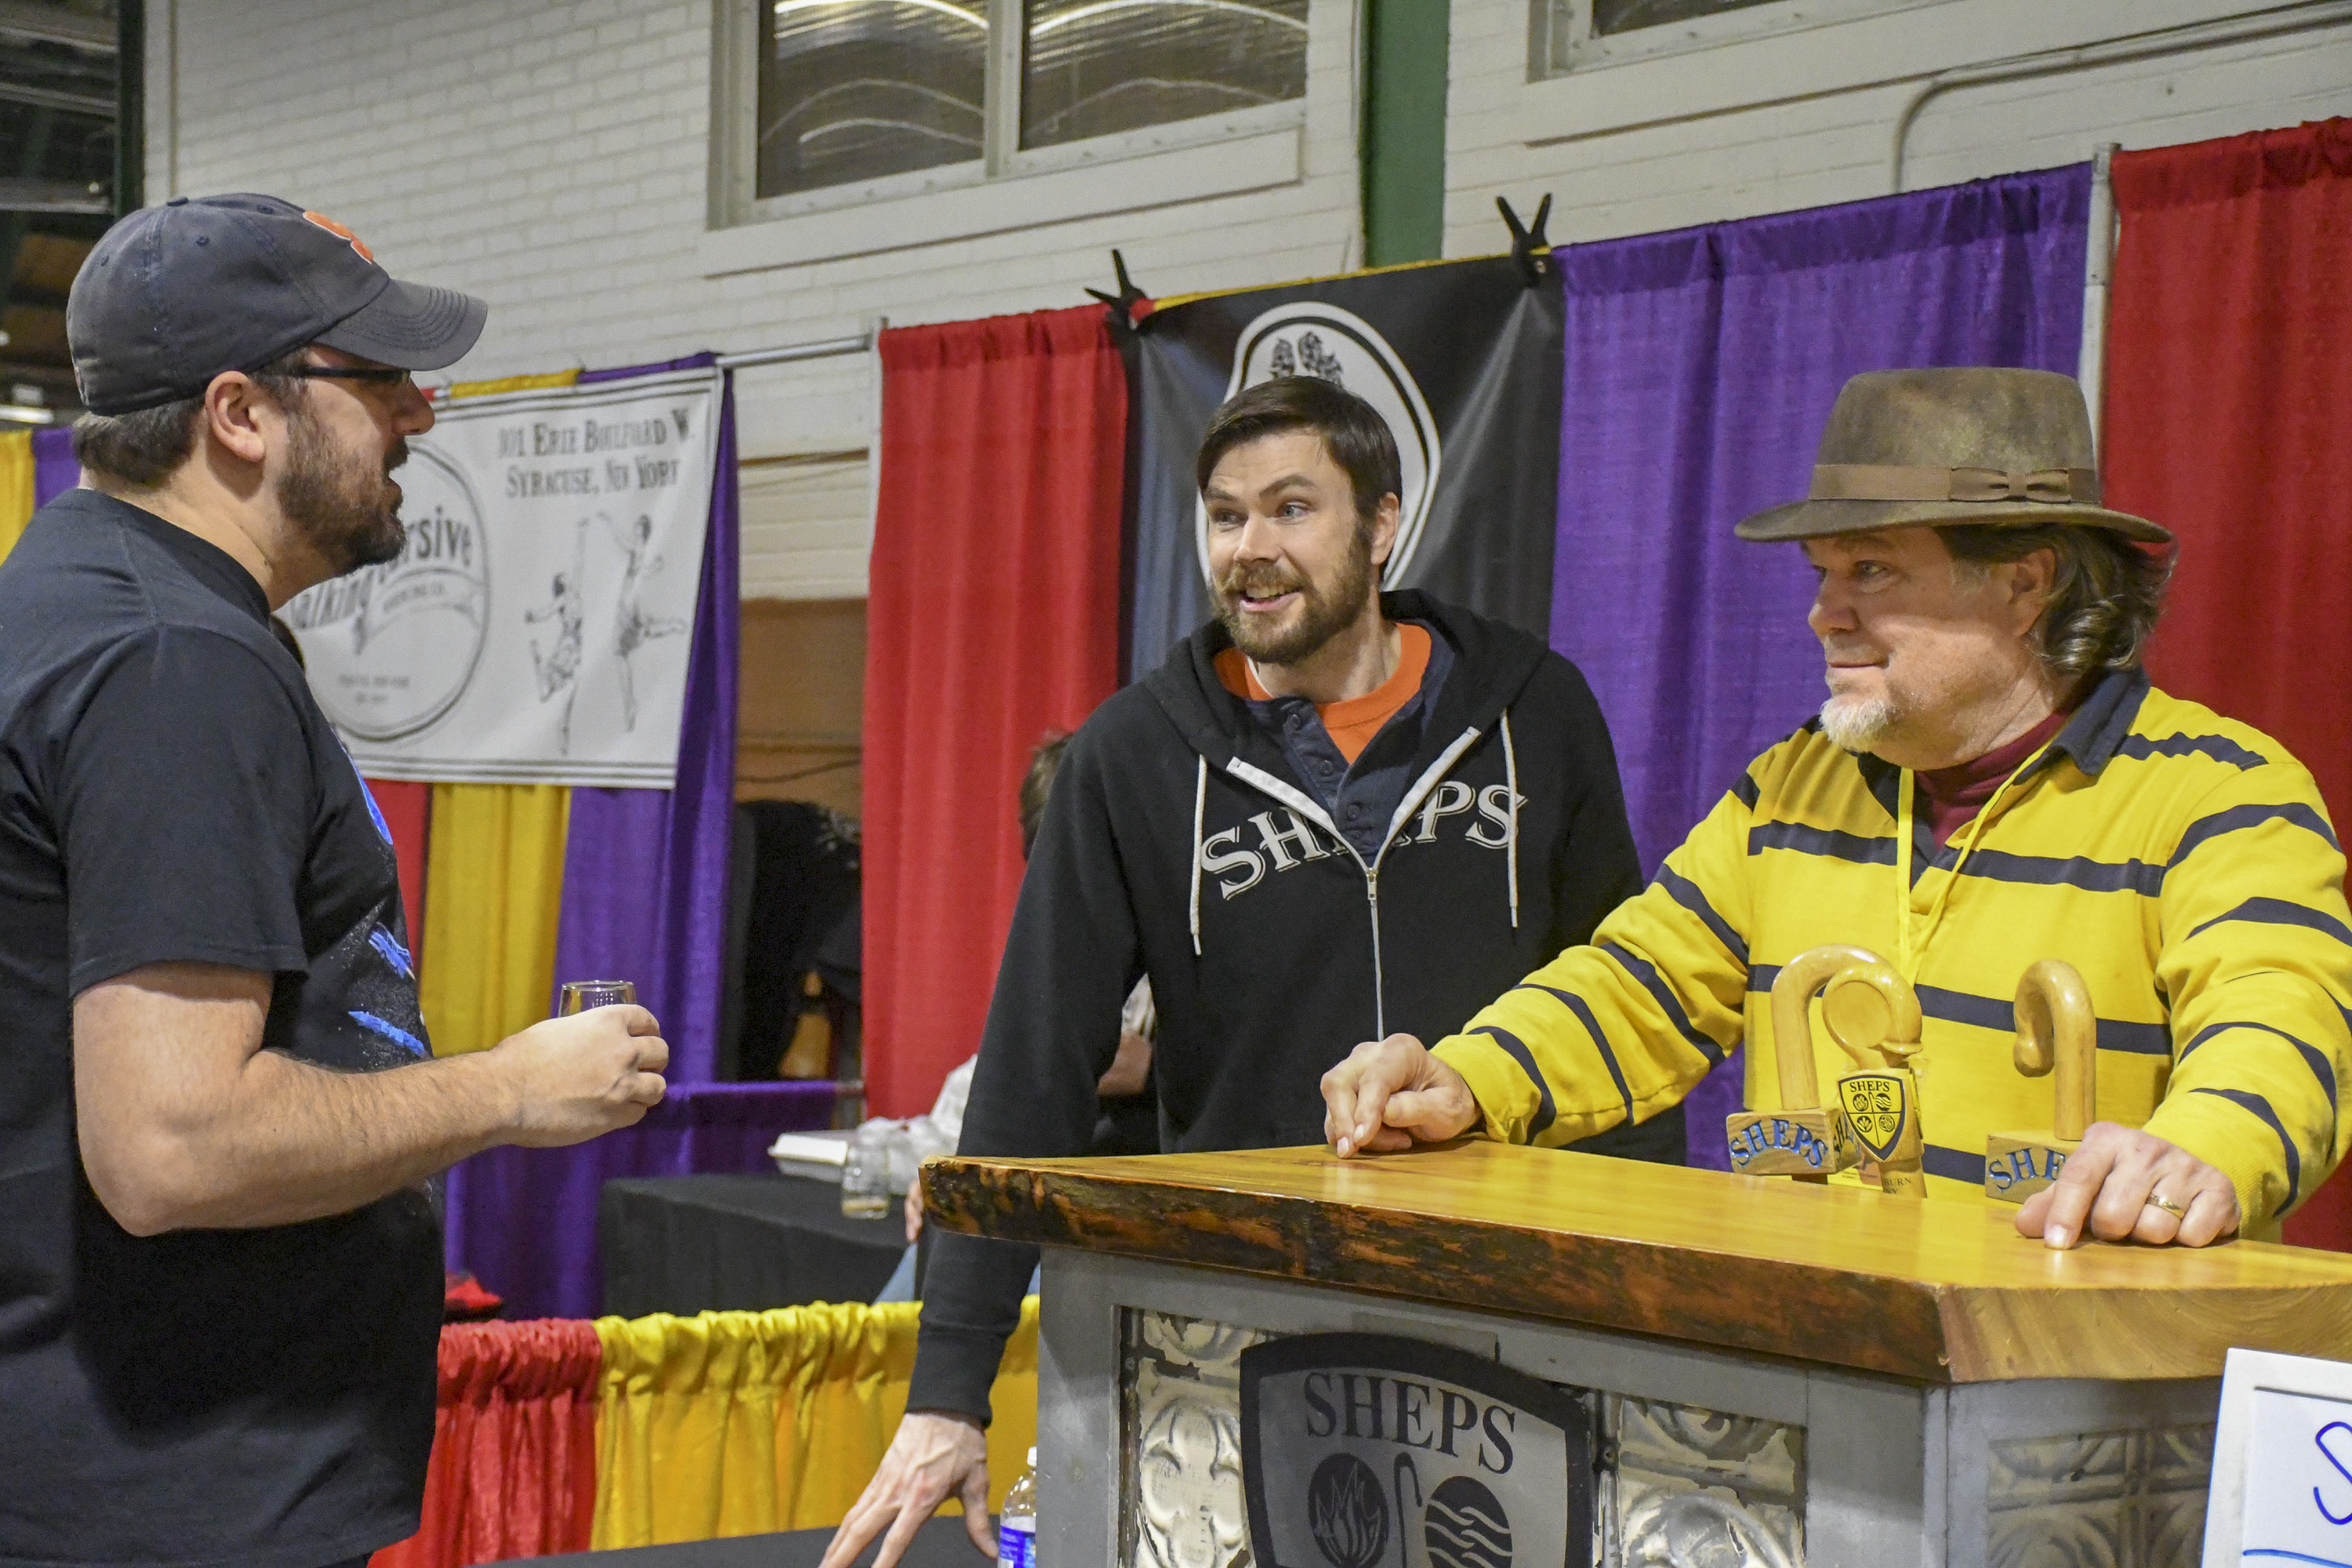 SHEPS Brewery talks with fellow beer lovers at the CNY Brewfest.